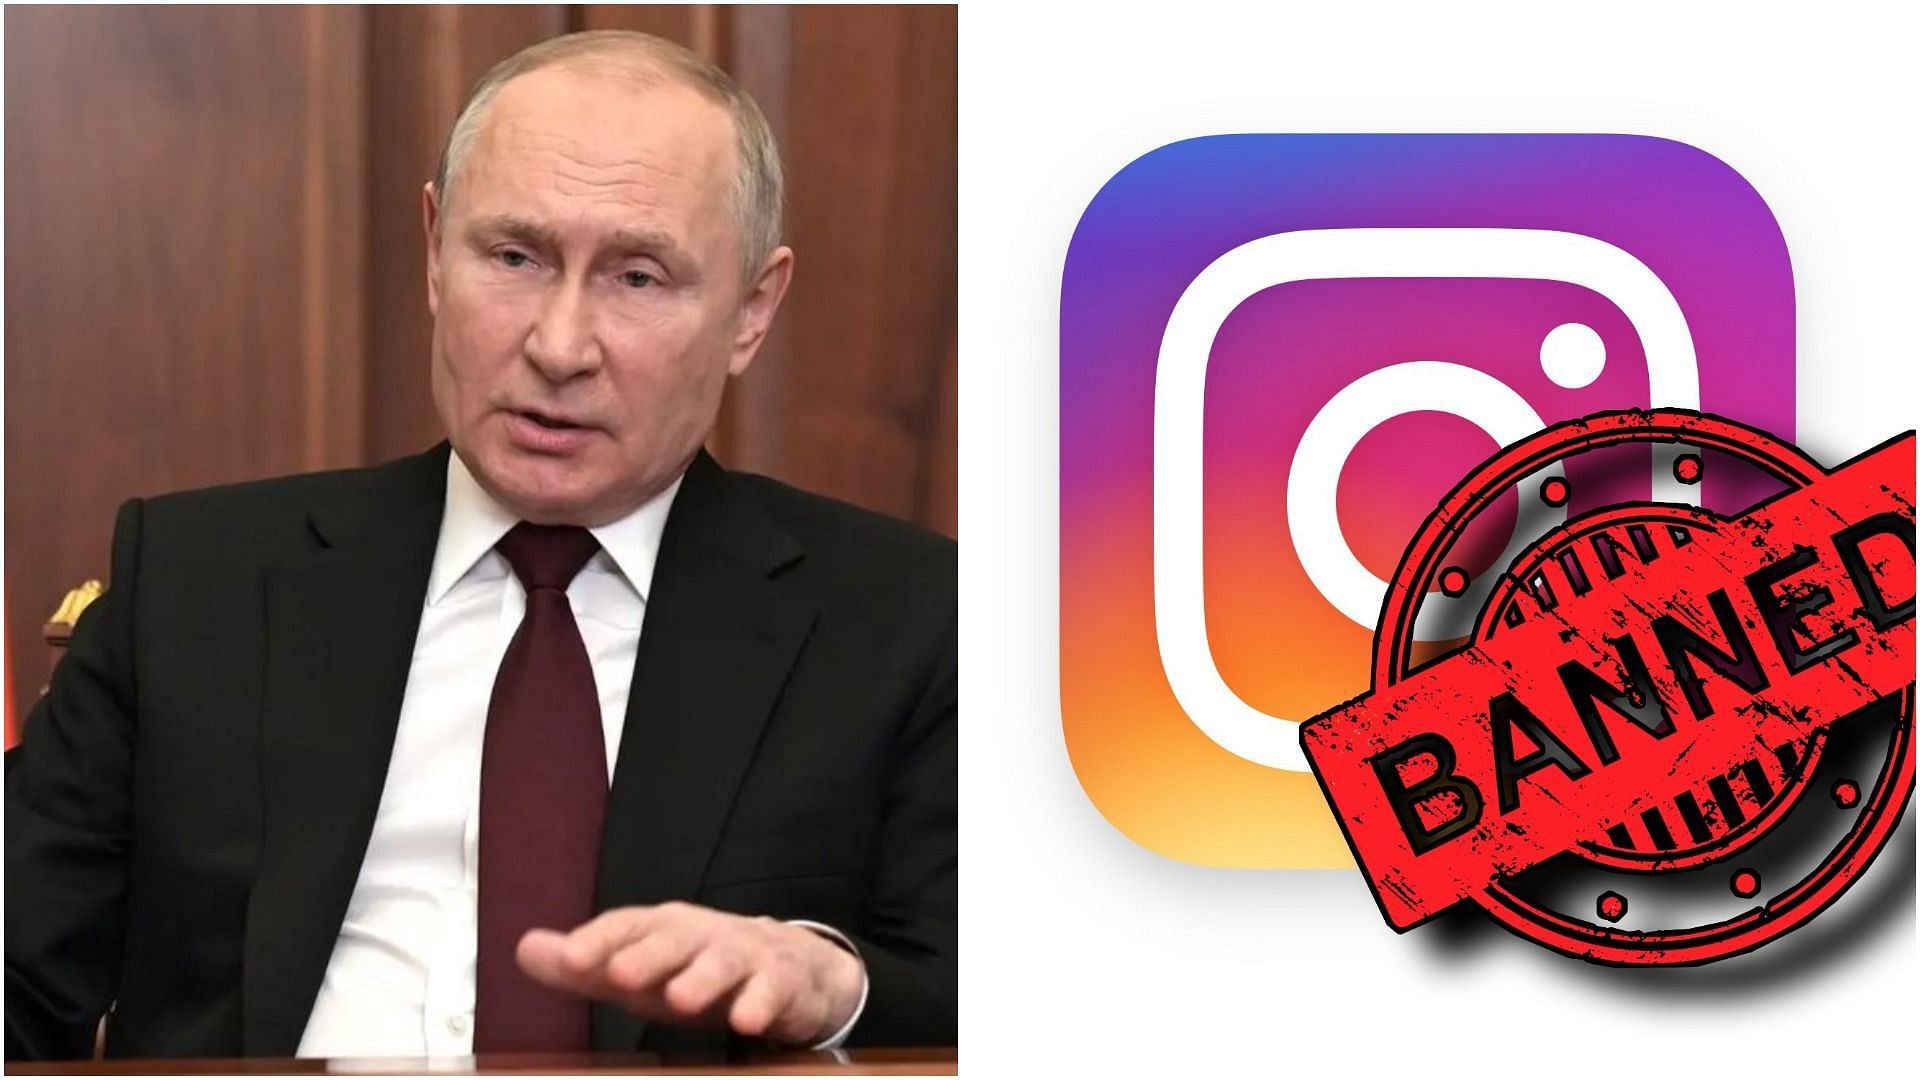 Russian government advised citizens to use Russian build versions of the app (Image via leadervladimirputin/Instagram and Sportskeeda)